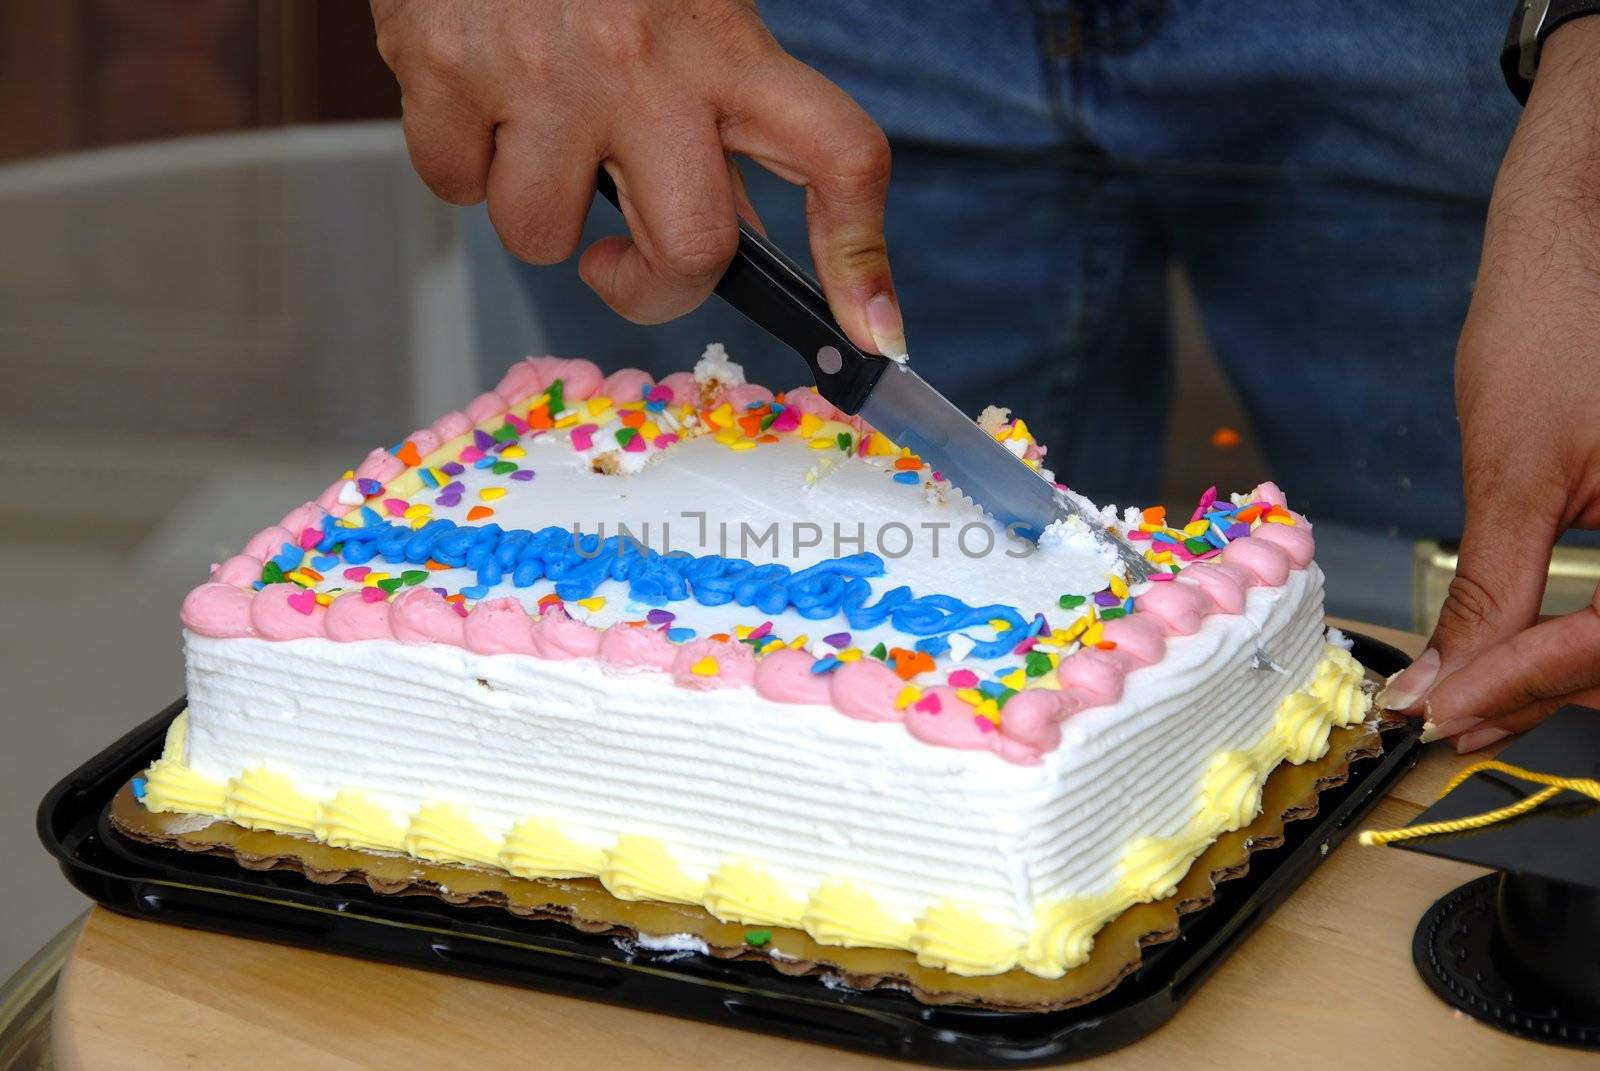 Curtting Cake Cutting  to celeberate - cocept of success